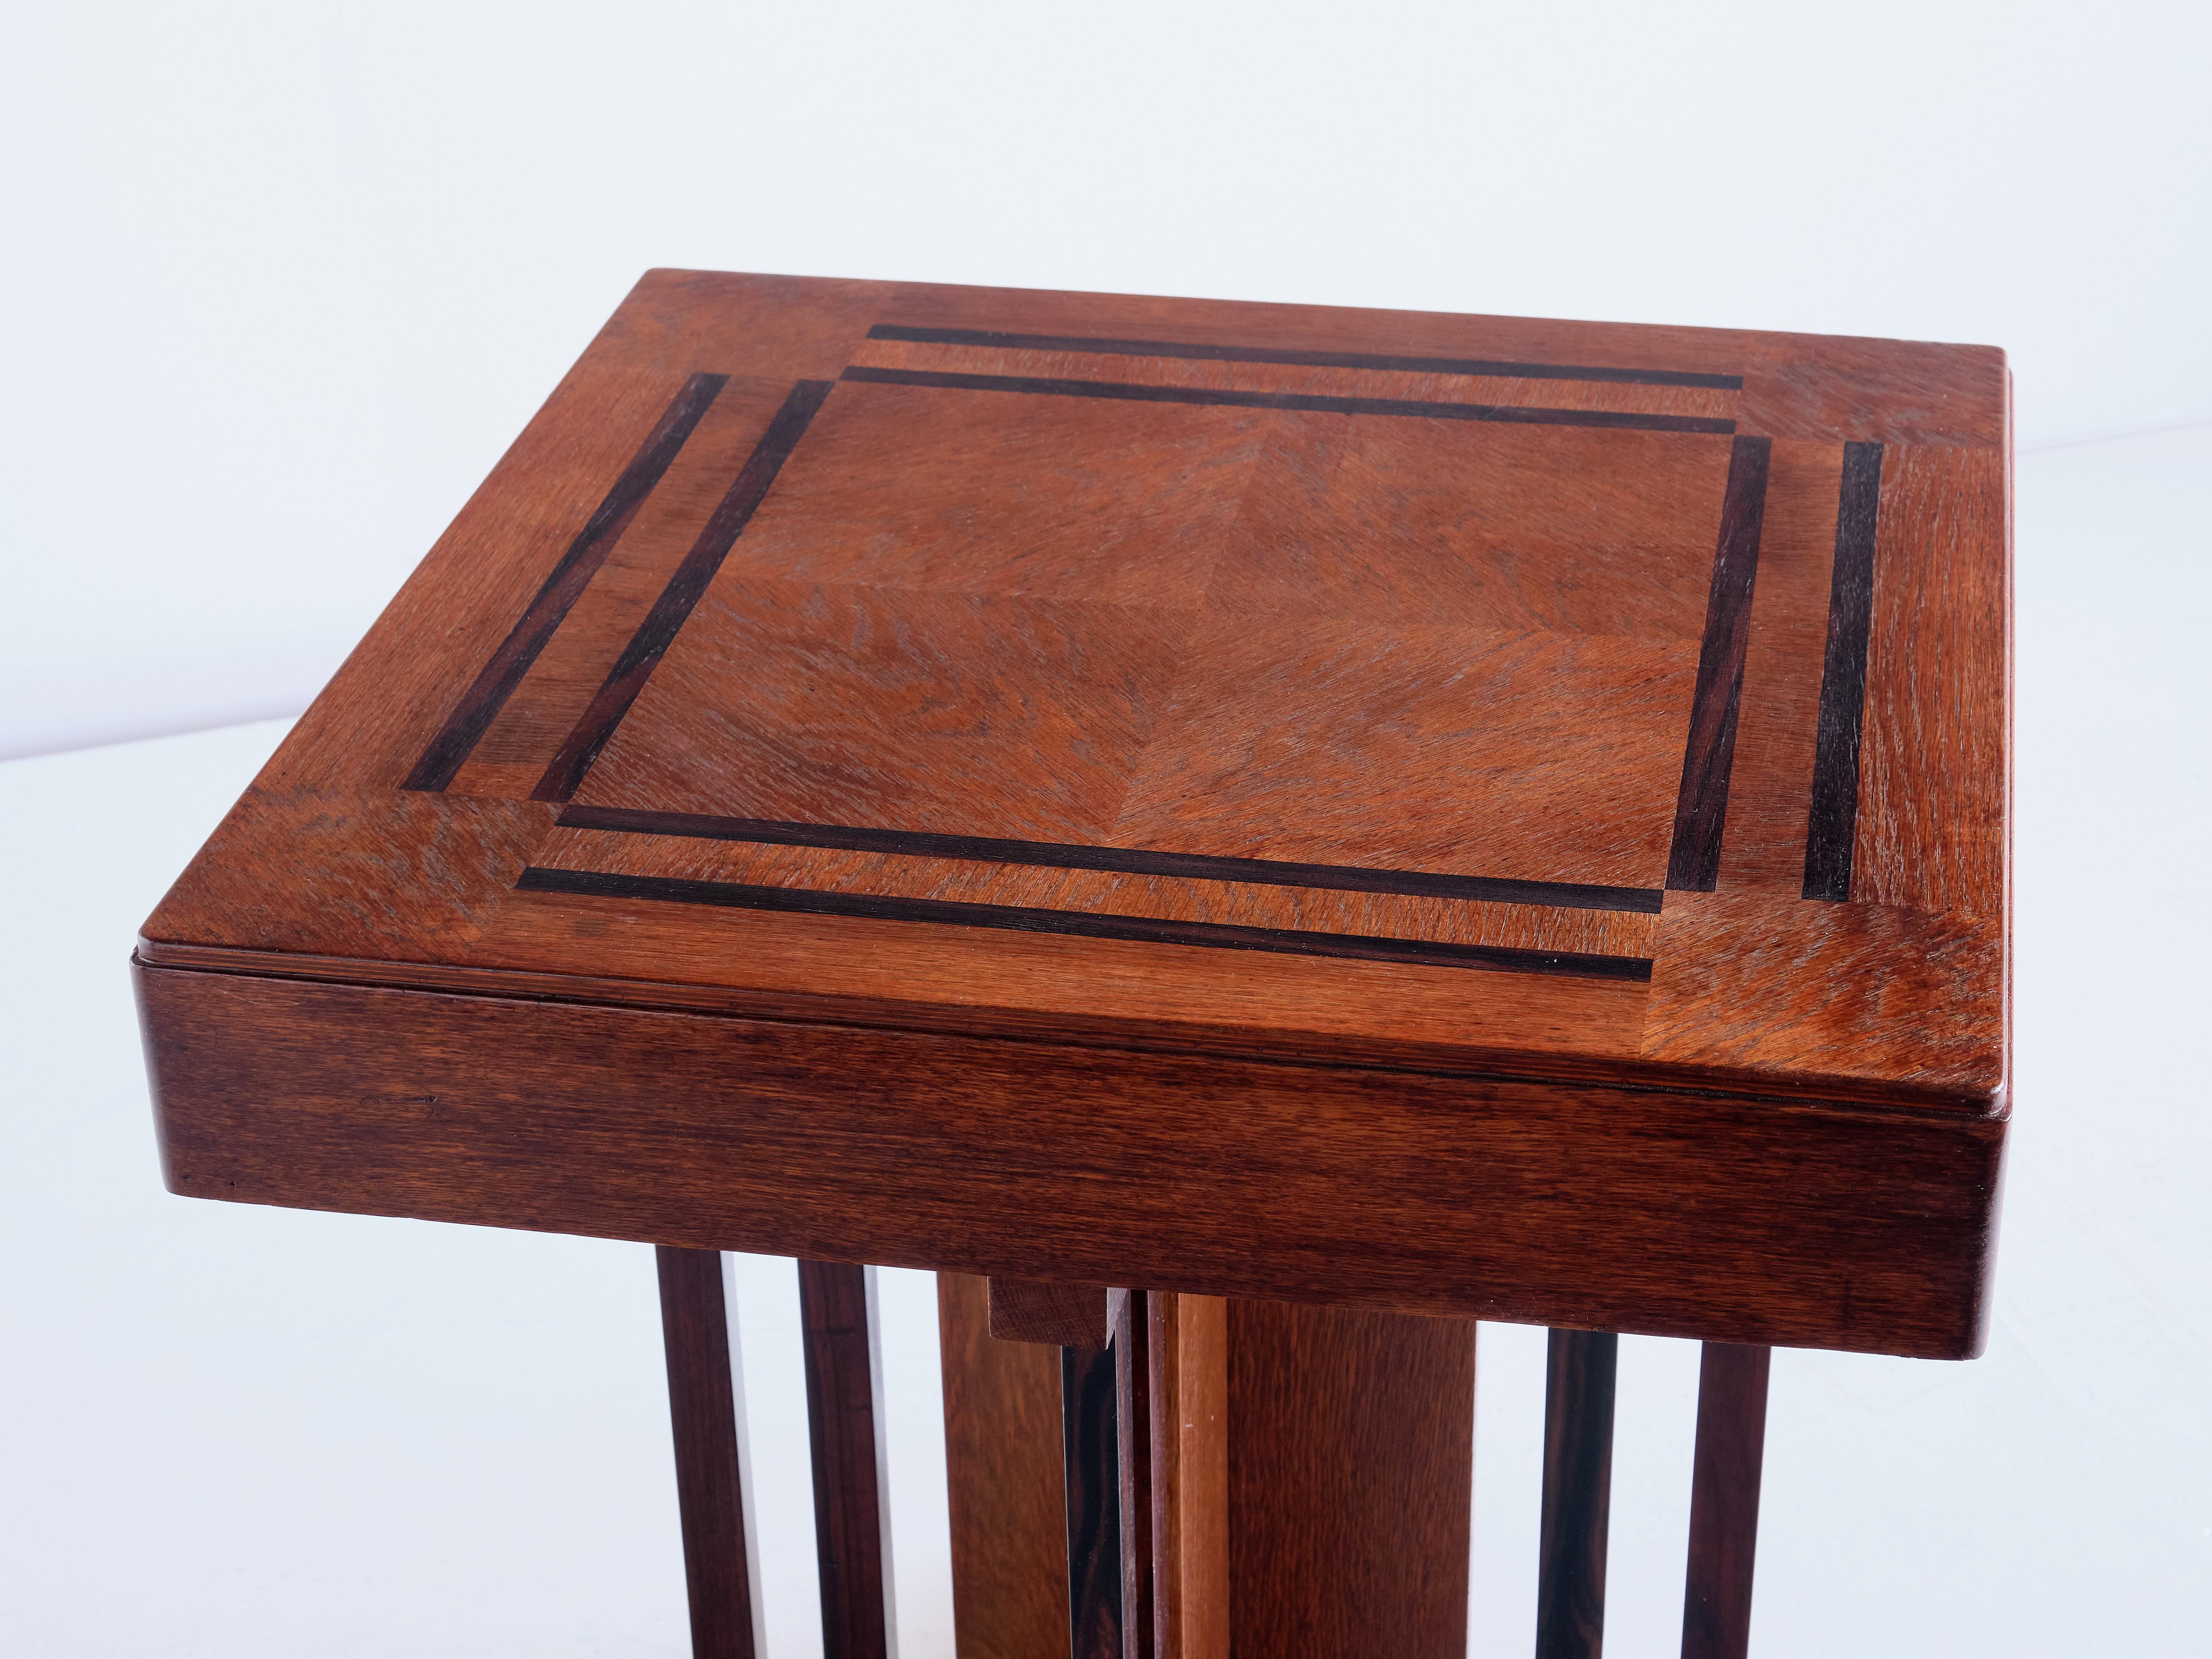 P.E.L. Izeren Side Table in Oak and Macassar Ebony, Netherlands, 1930s For Sale 1